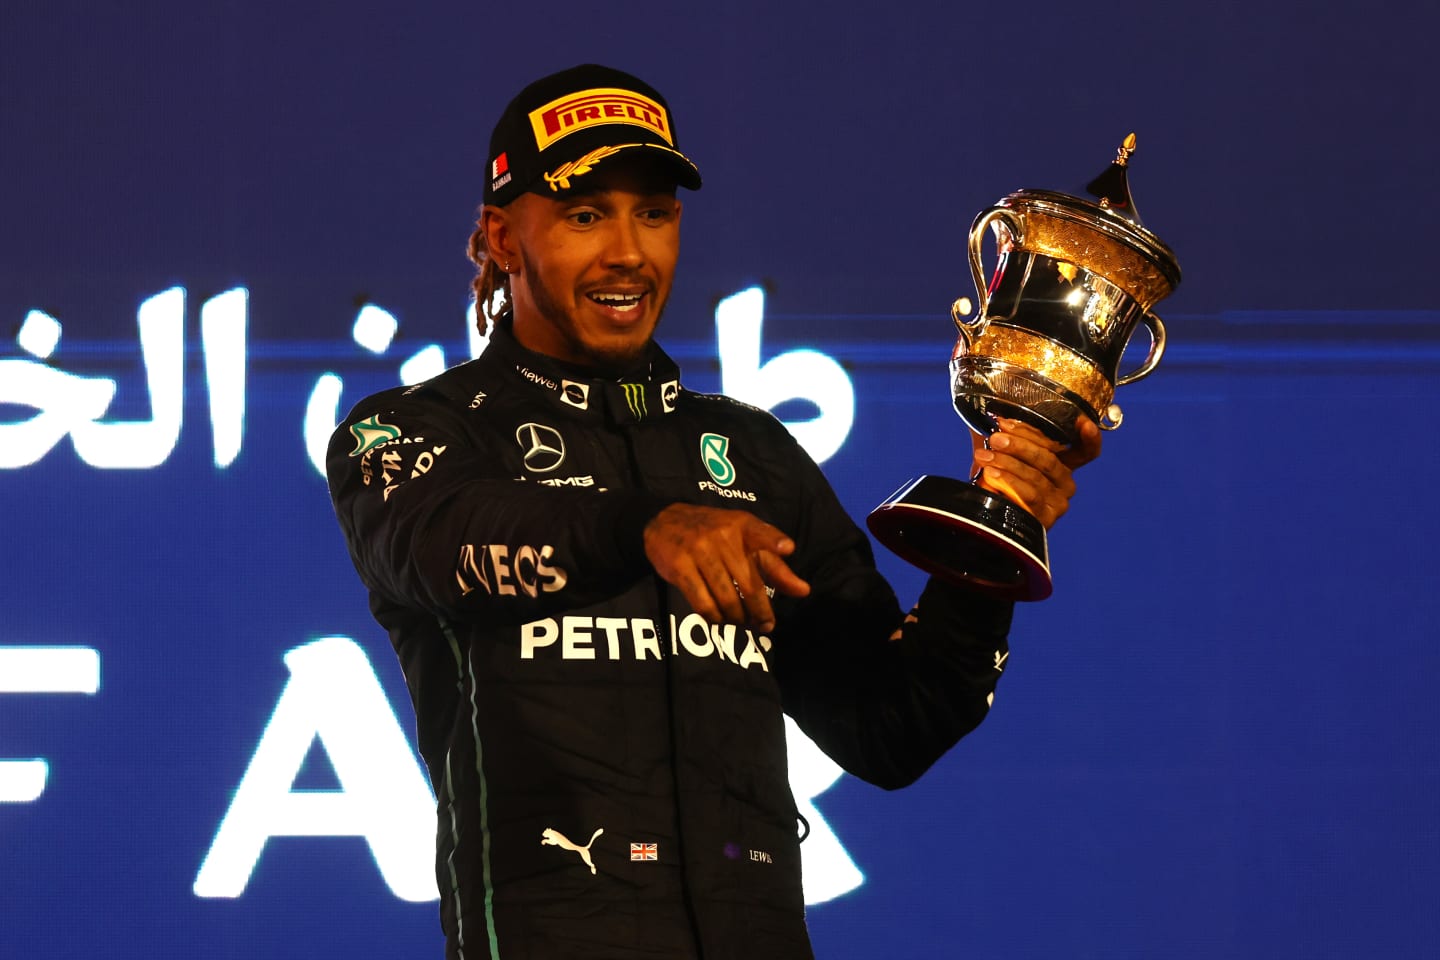 BAHRAIN, BAHRAIN - MARCH 20: Third placed Lewis Hamilton of Great Britain and Mercedes celebrates on the podium during the F1 Grand Prix of Bahrain at Bahrain International Circuit on March 20, 2022 in Bahrain, Bahrain. (Photo by Lars Baron/Getty Images)